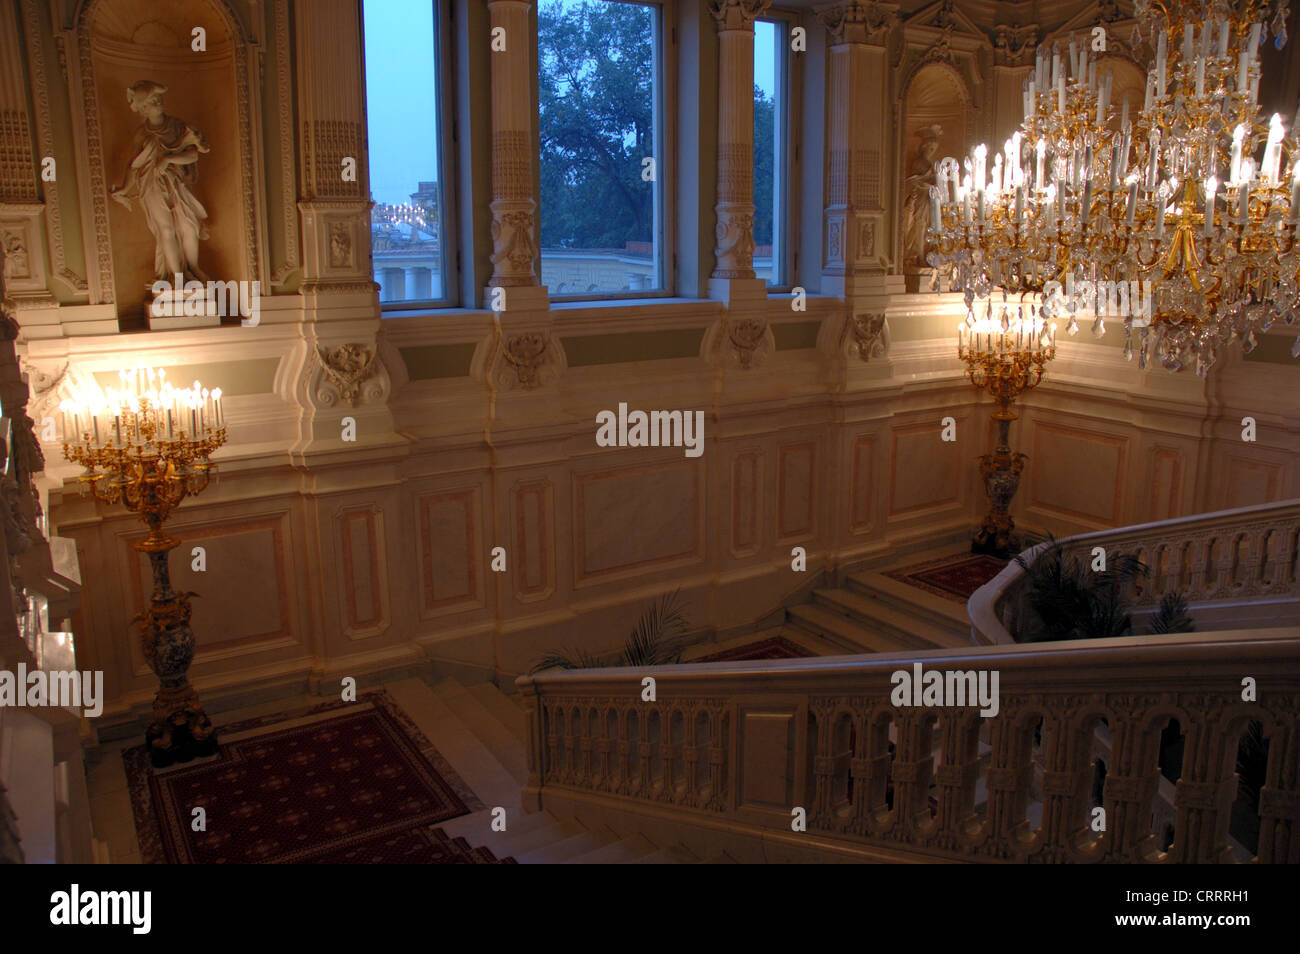 Grand Staircase, Yusupov Palace, St Petersburg, Russia Stock Photo